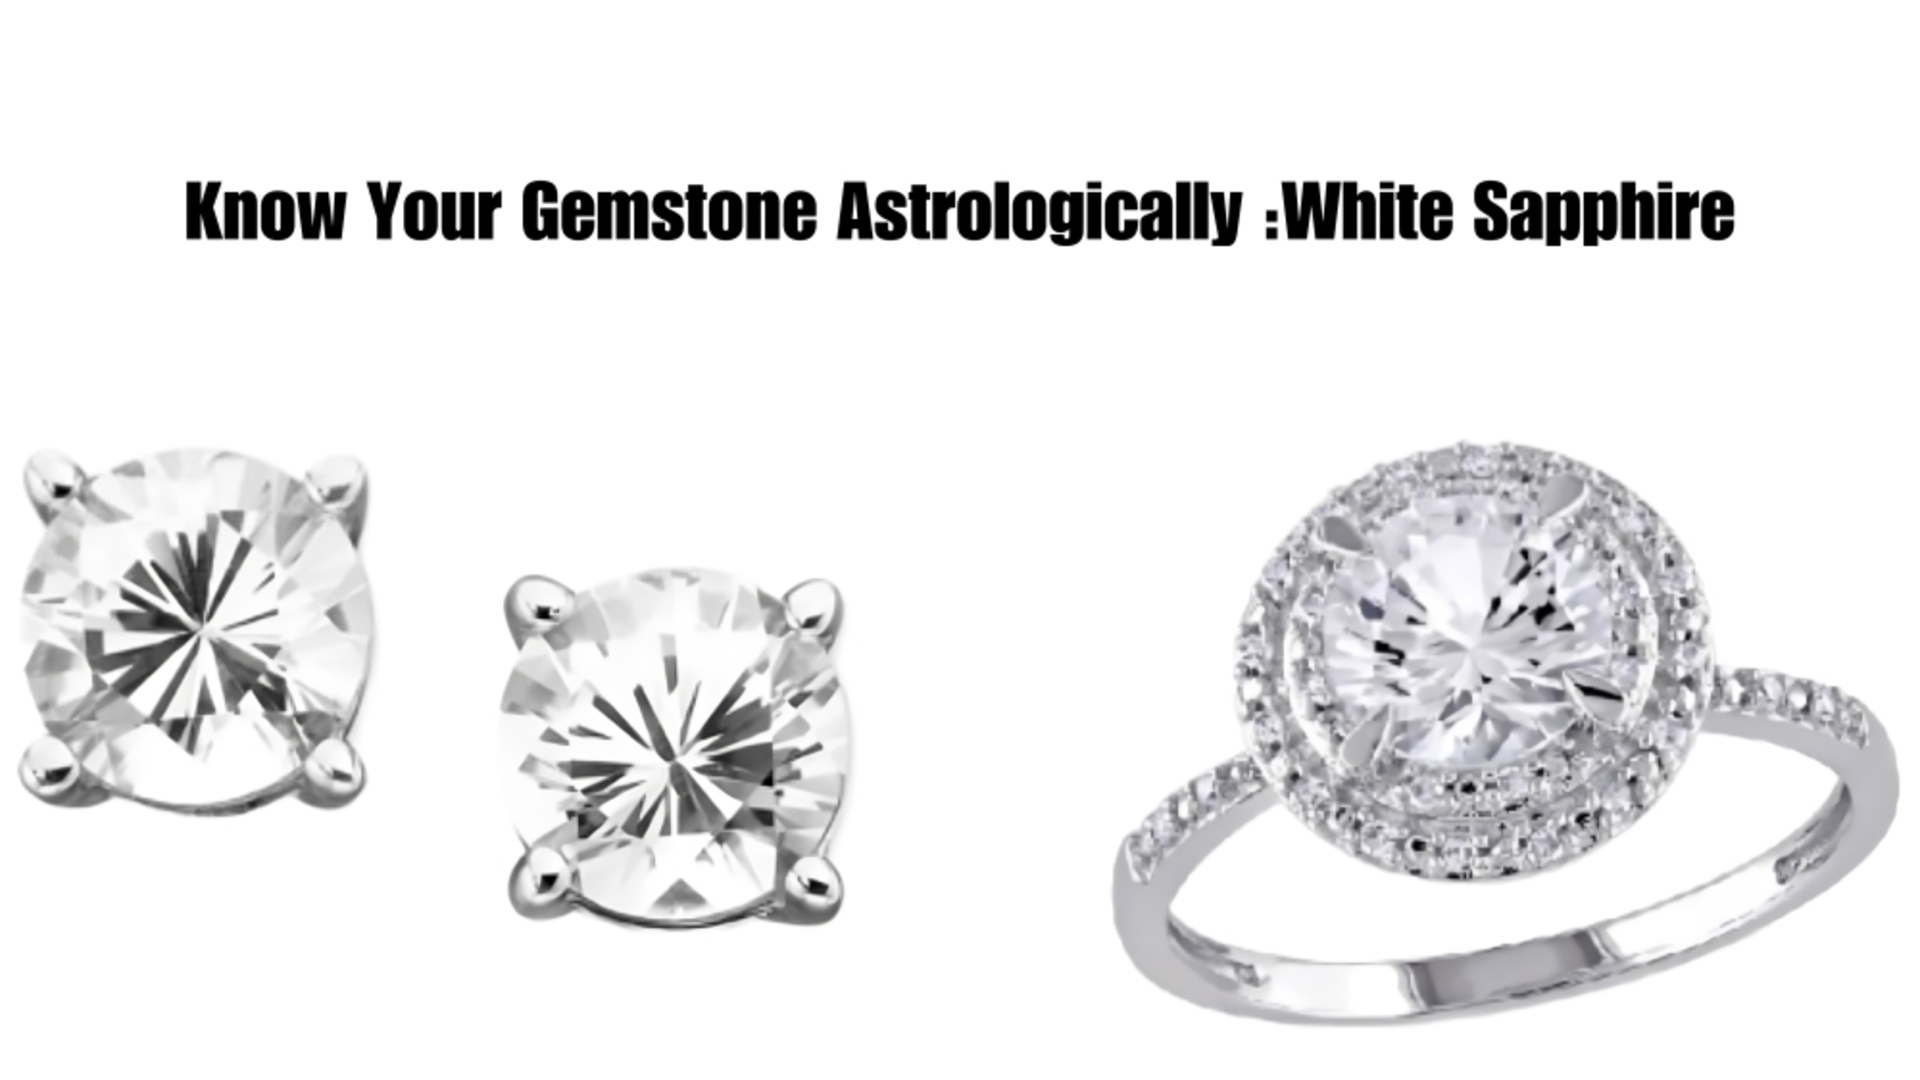 Know-Your-Gemstone-Astrologically-White-Sapphire.